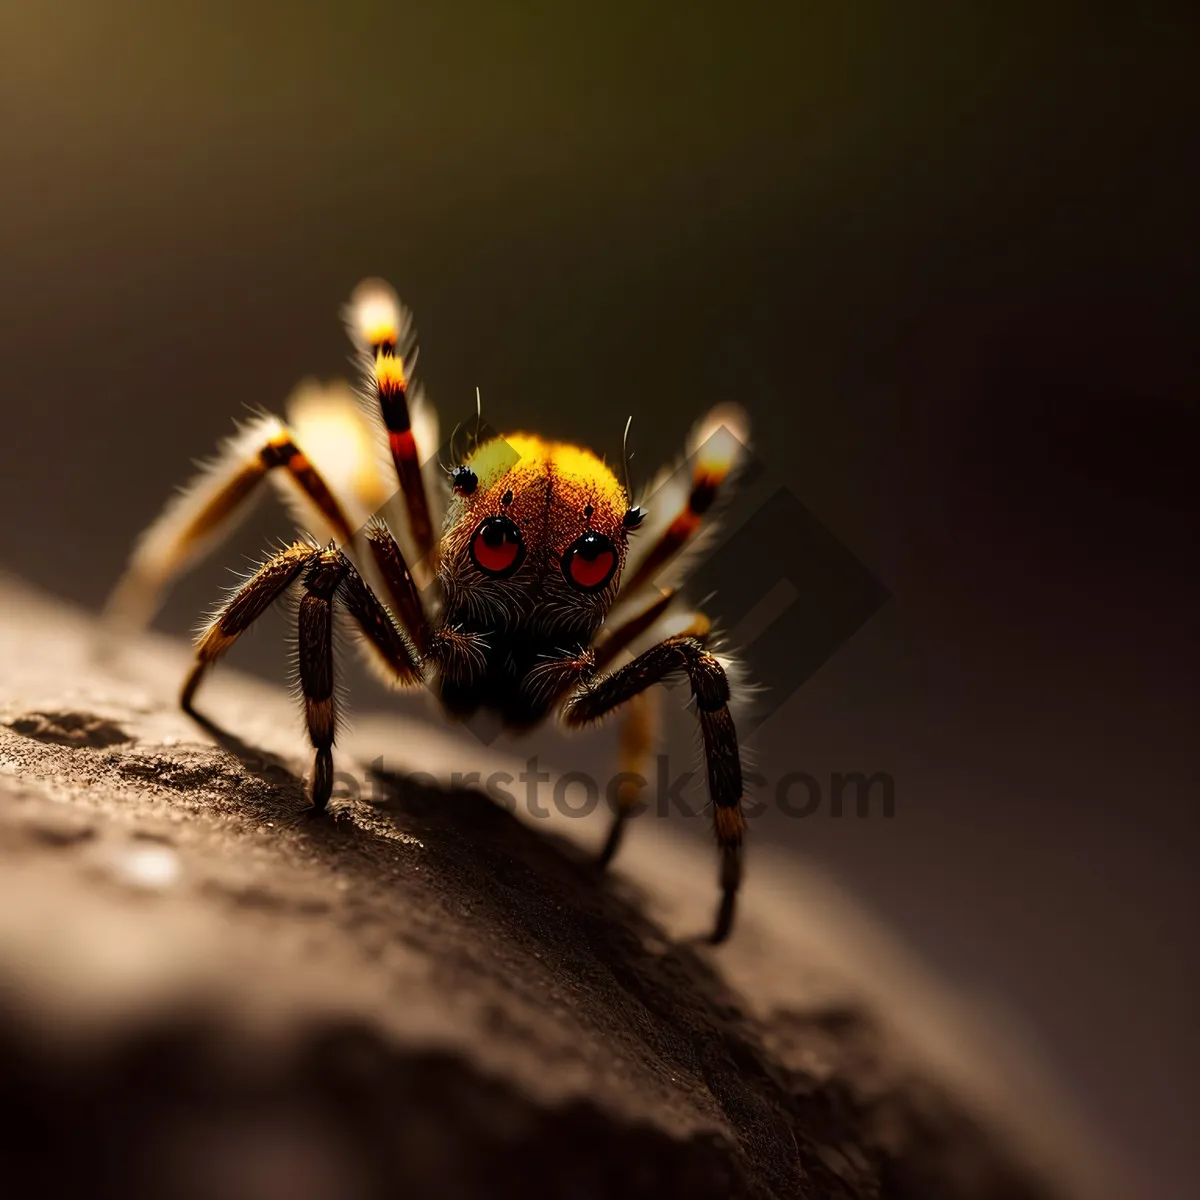 Picture of Closeup of a Black Widow Spider on Plant